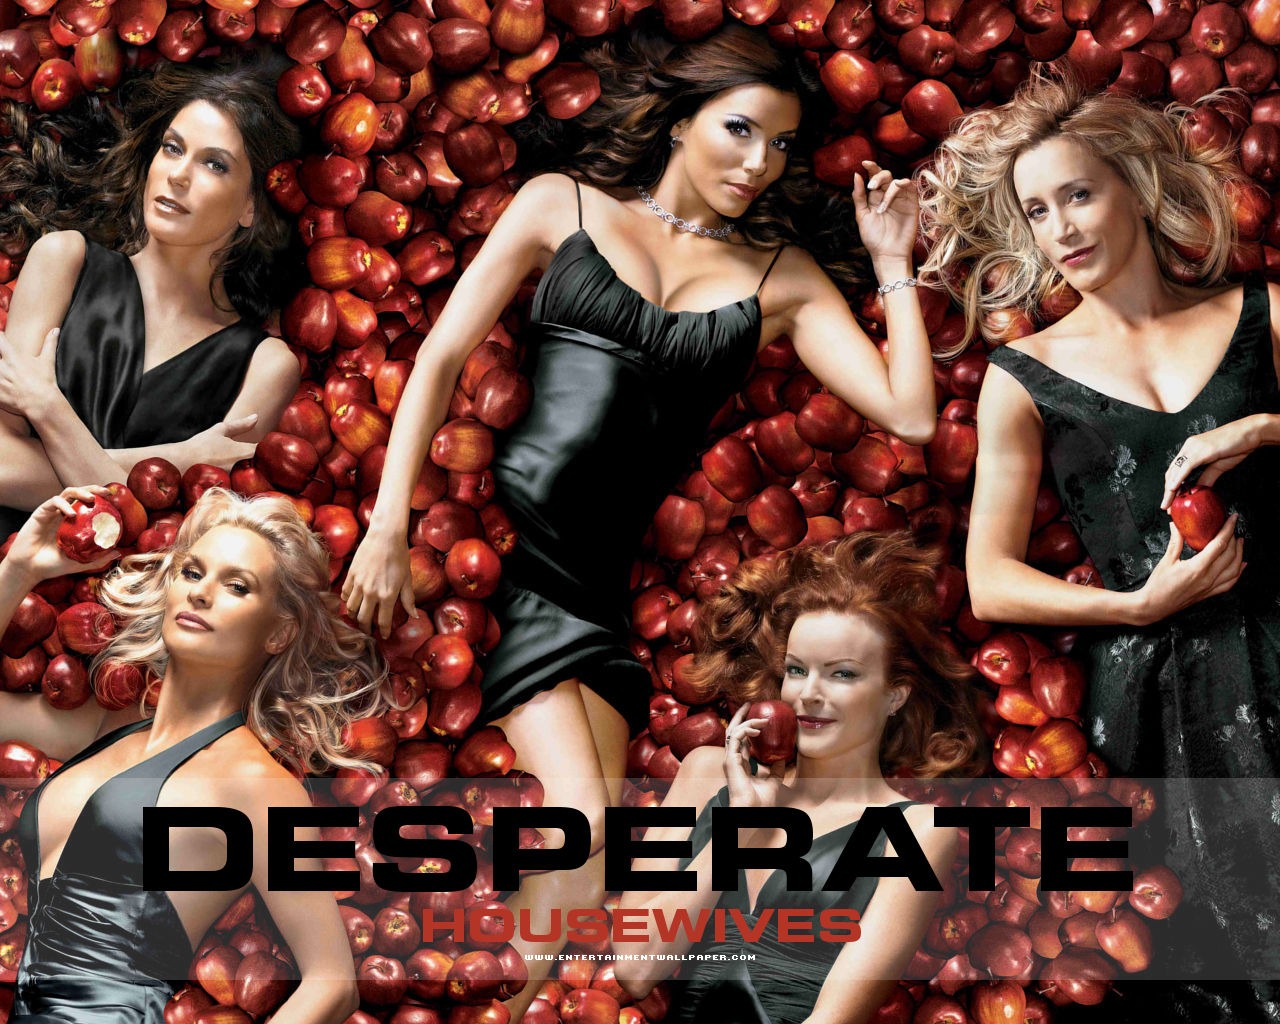 Desperate Housewives 絕望的主婦 #36 - 1280x1024